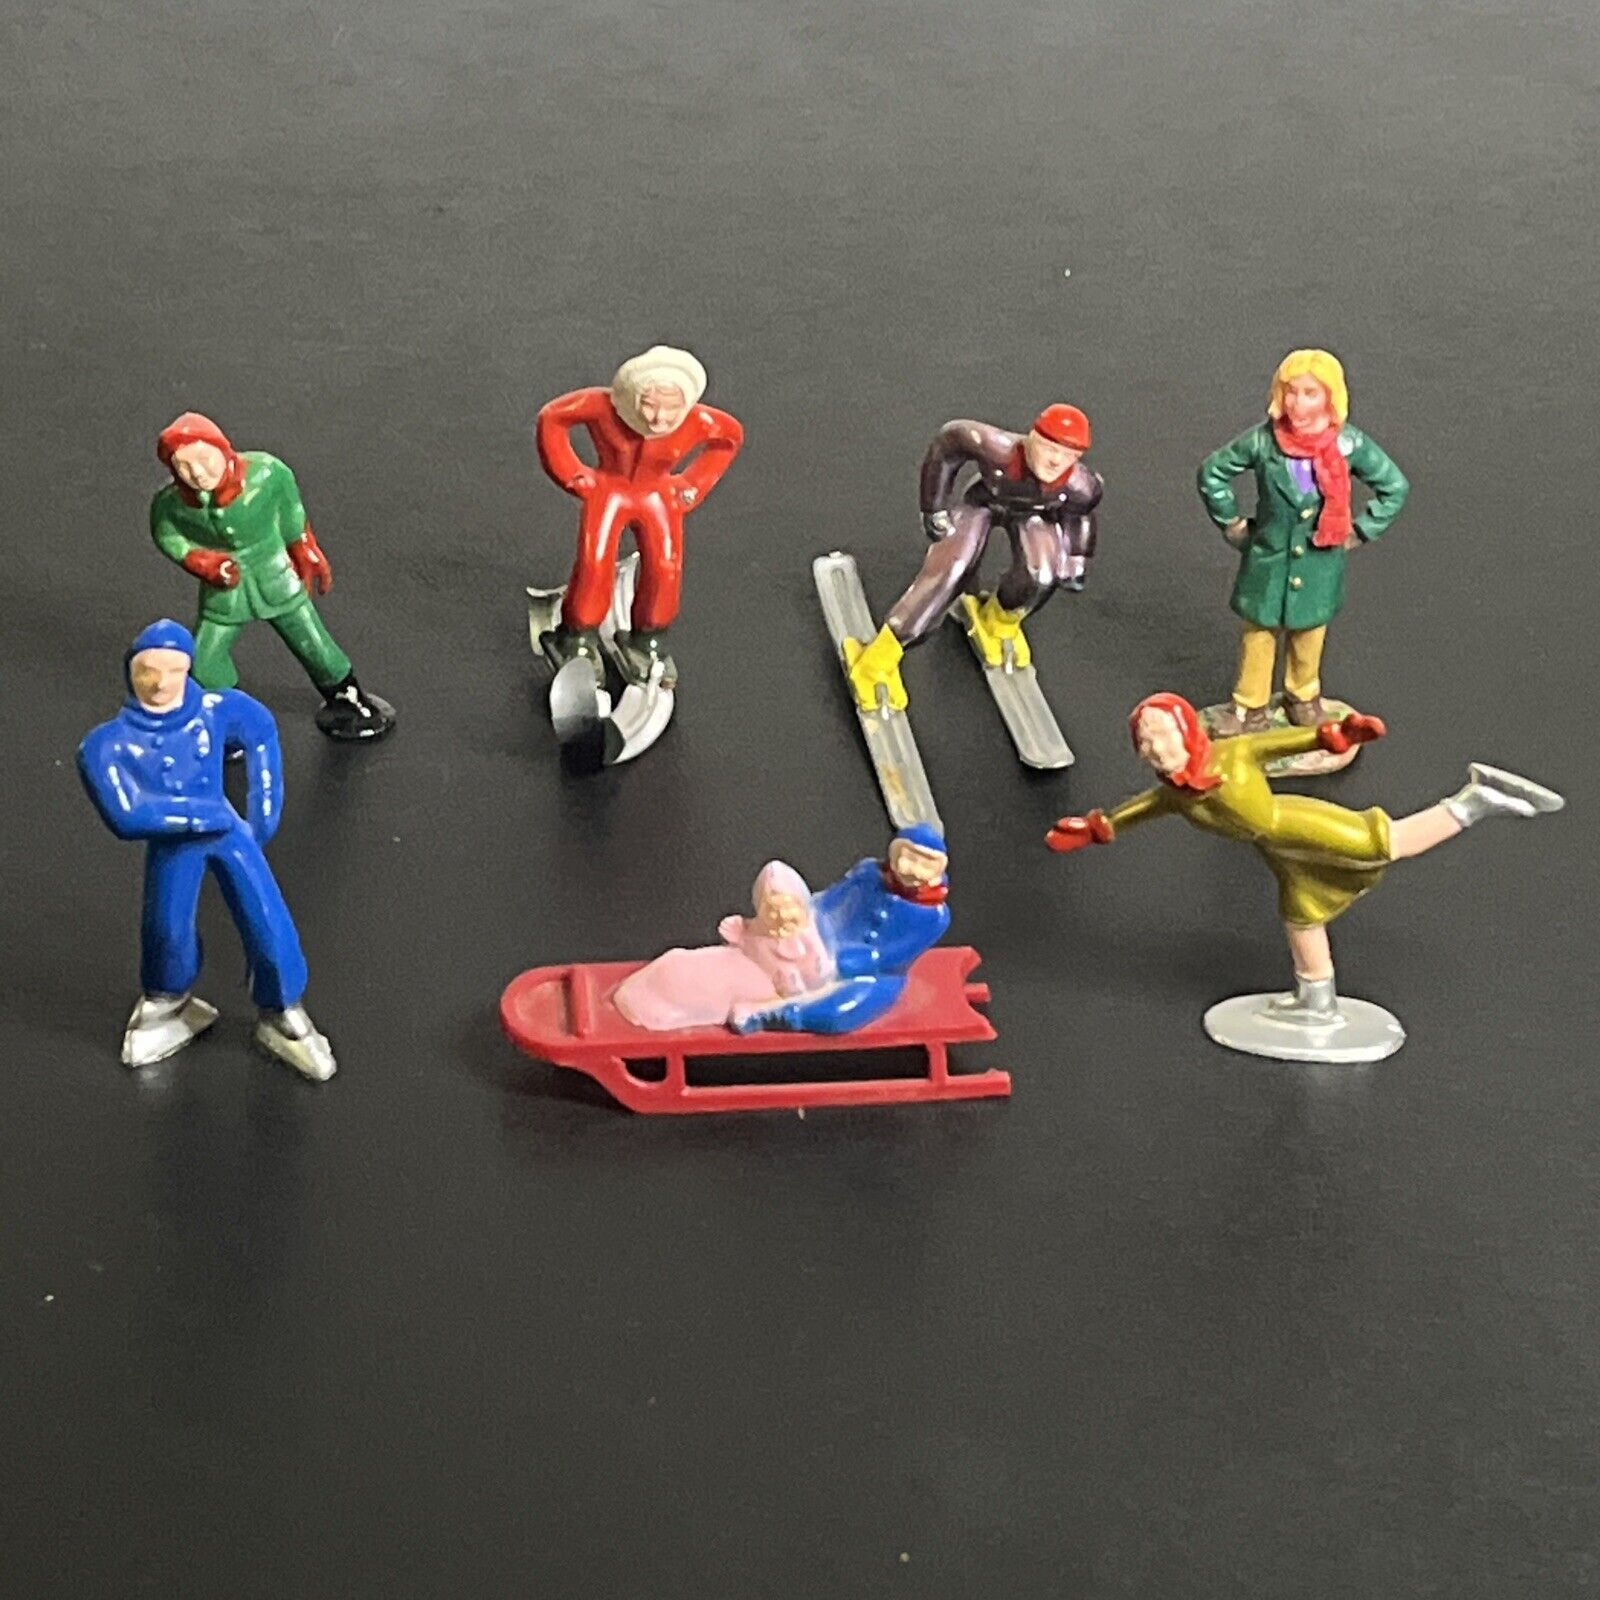 Vintage 1950’s? Skiing Ice-Skating Figurines LOT OF 7 Fowind Made In Hong Kong